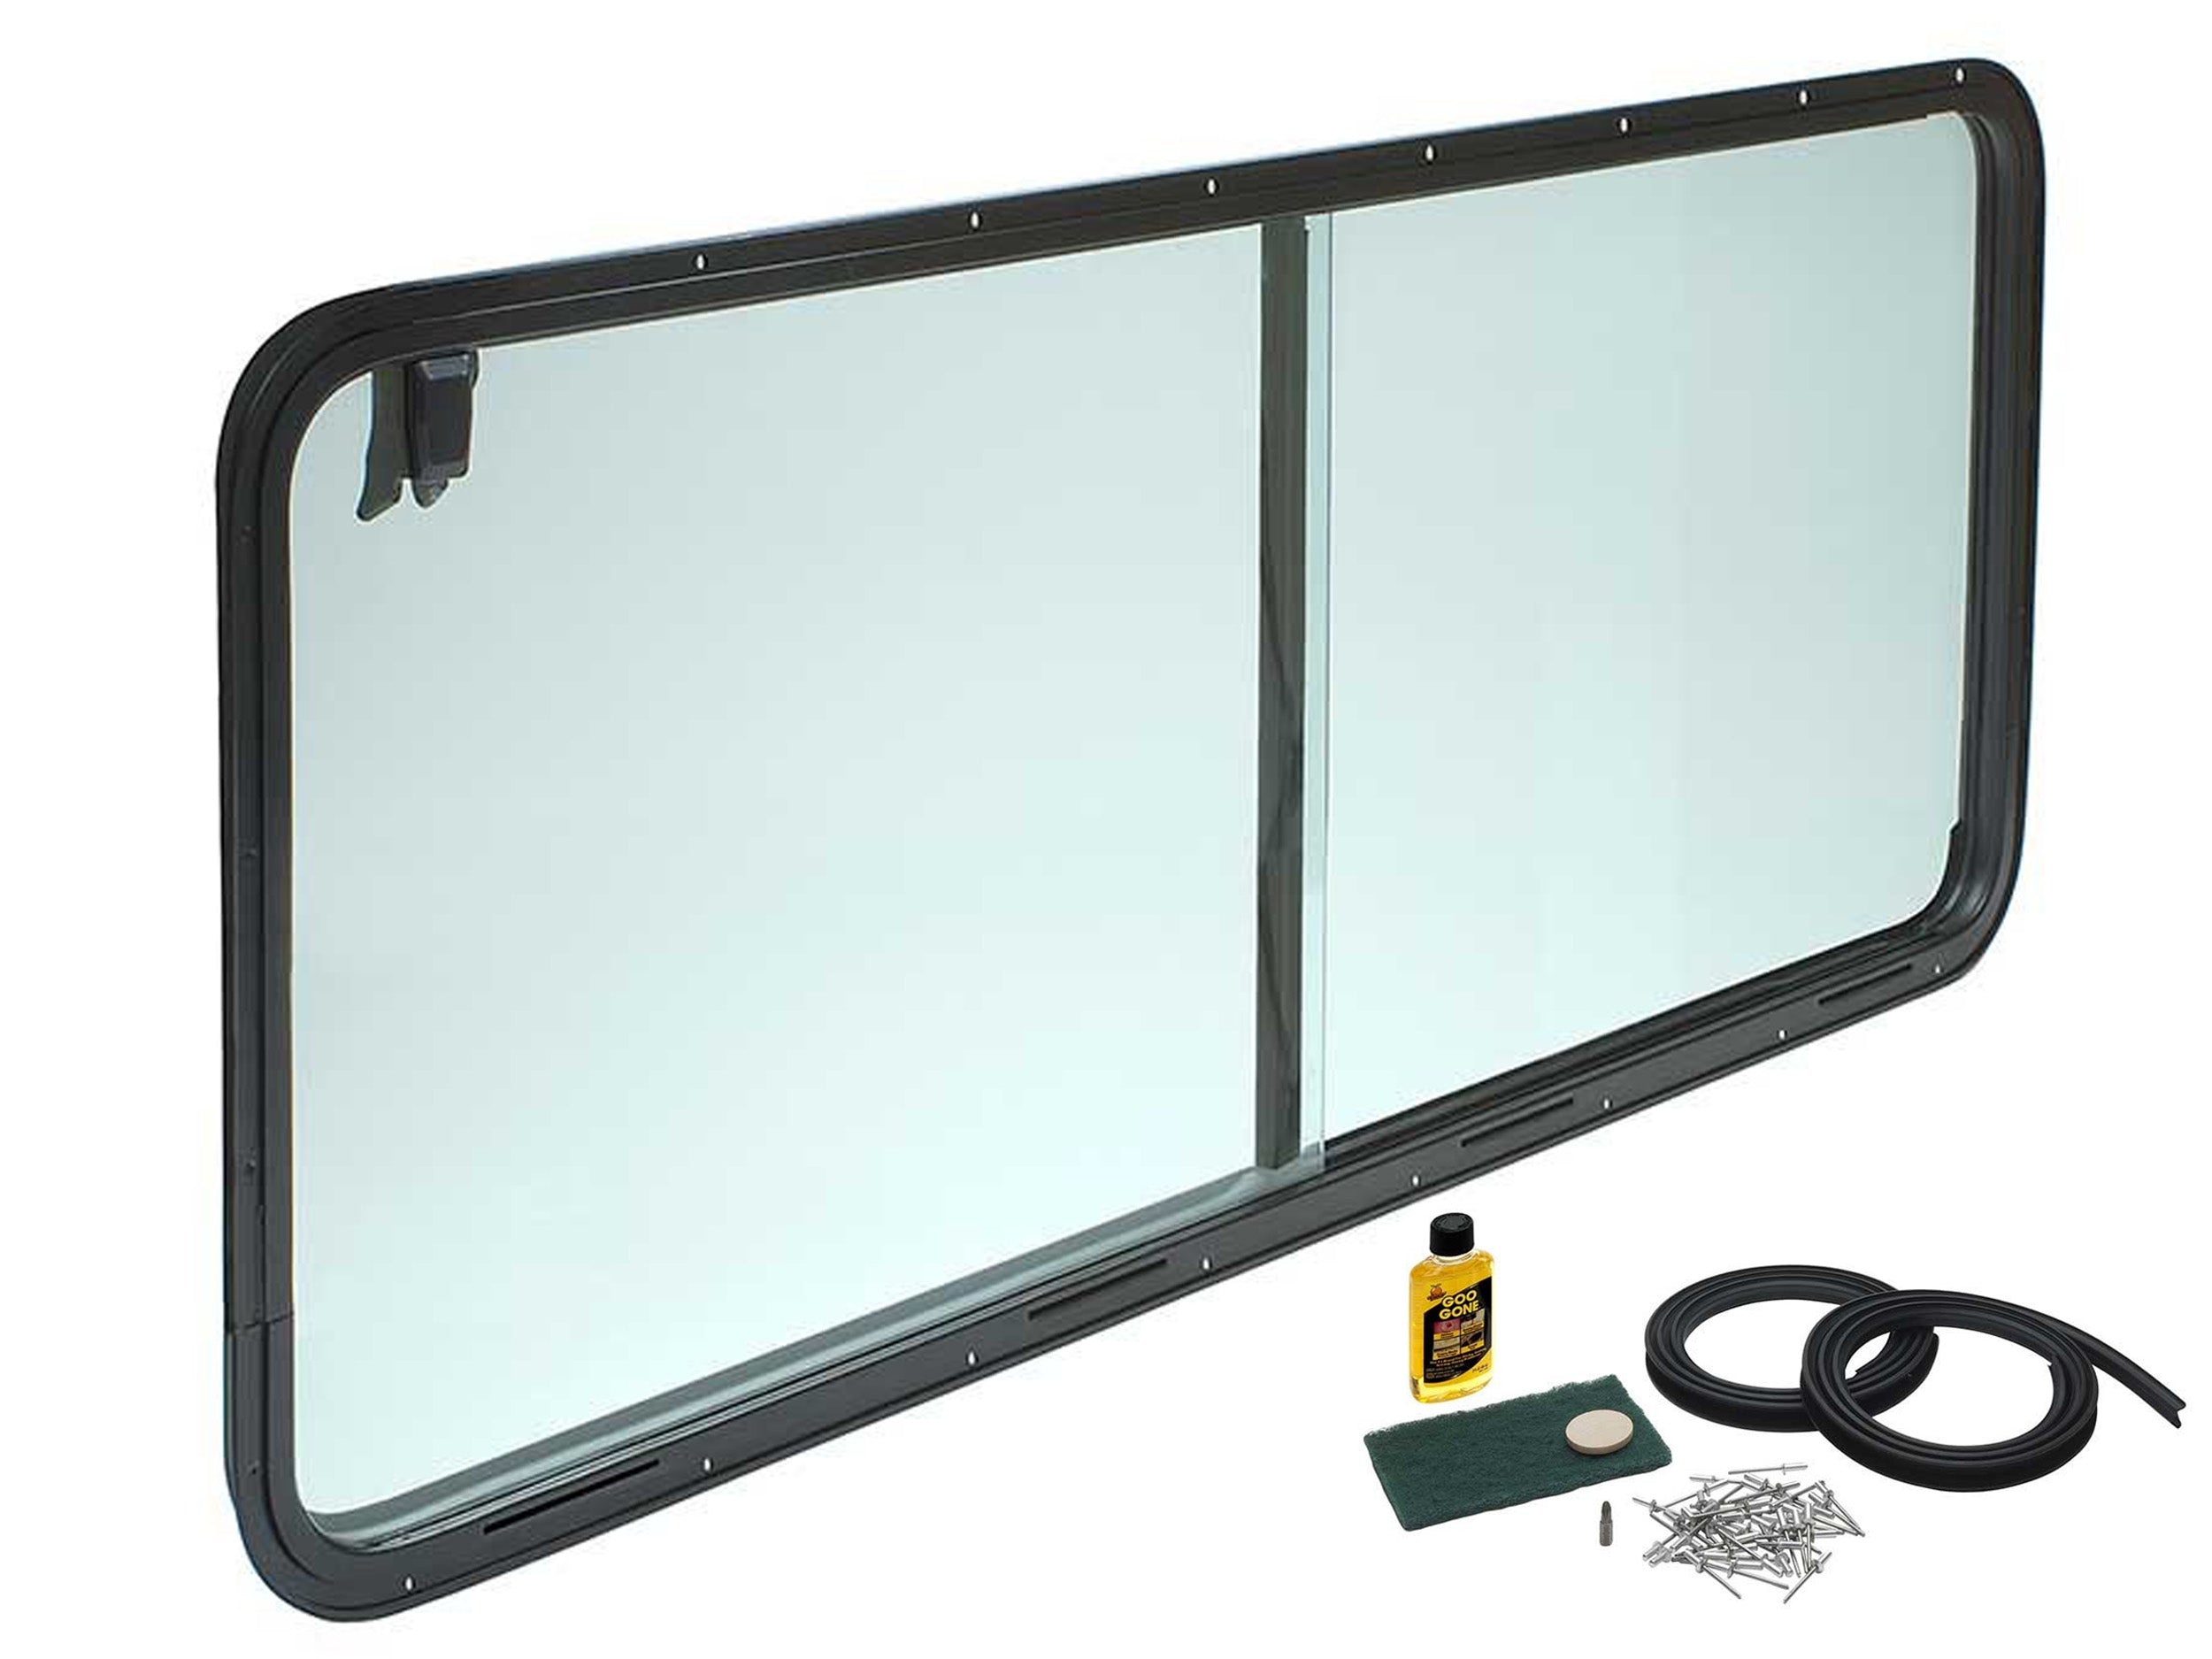 Anti-Rattle Window Channel Kit (for Station Wagon / Rear Sliding Windows) - for Land Rover 90/110 [Garrison]